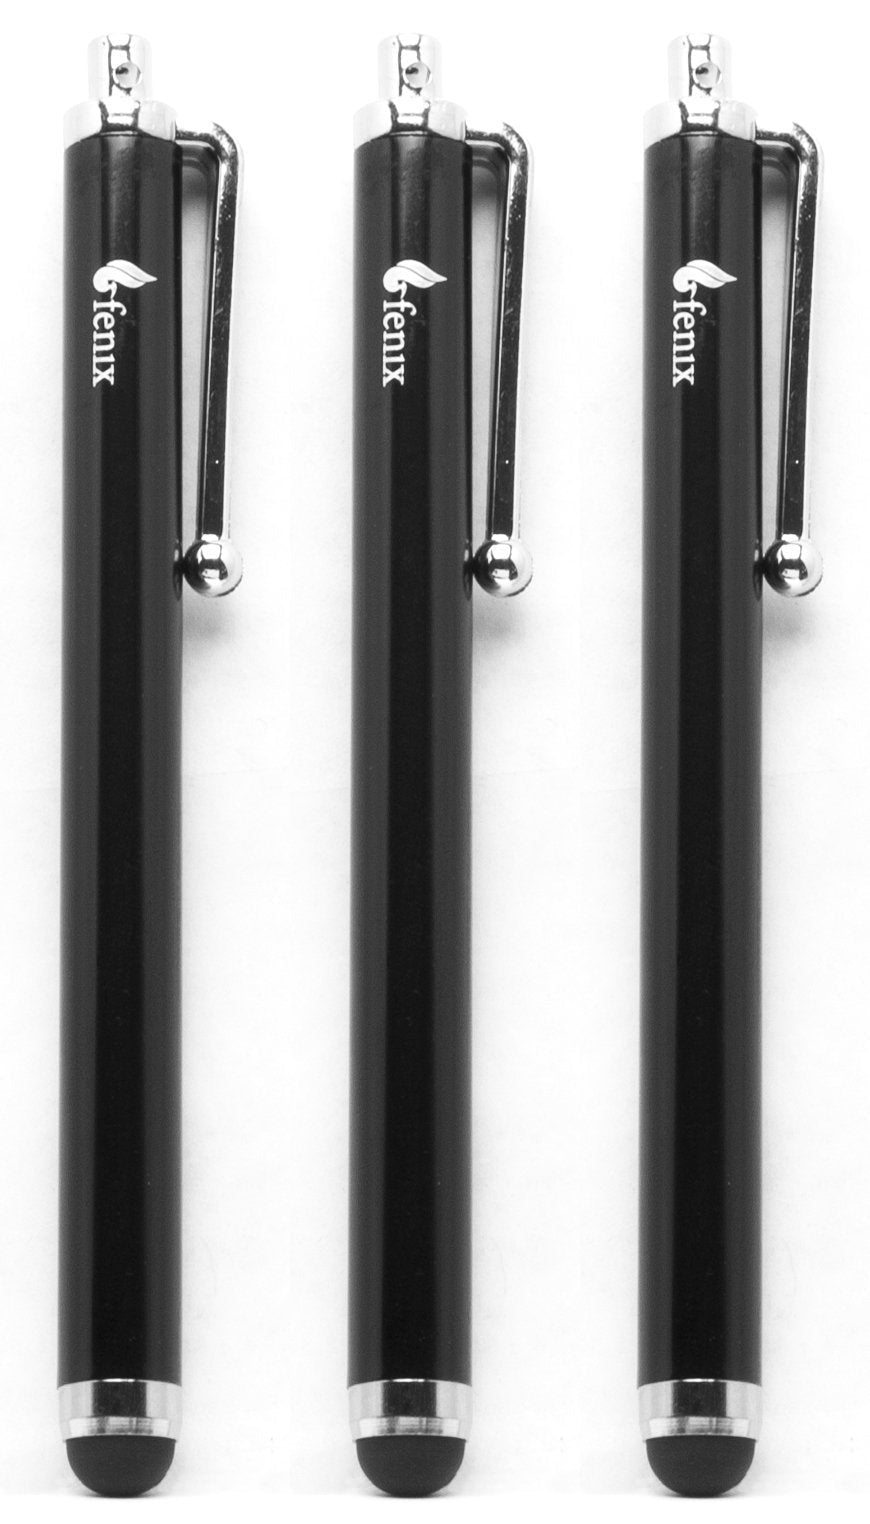 Fenix - Pack of Three Black Universal Stylus Pen with Matching Black Soft Rubber Tip for iPhone 4/5/5c/6/6+, iPad/iPad Air/iPad Mini, Samsung Galaxy S4/S5/S6/Edge, Kindle Fire, Surface Pro and Much More